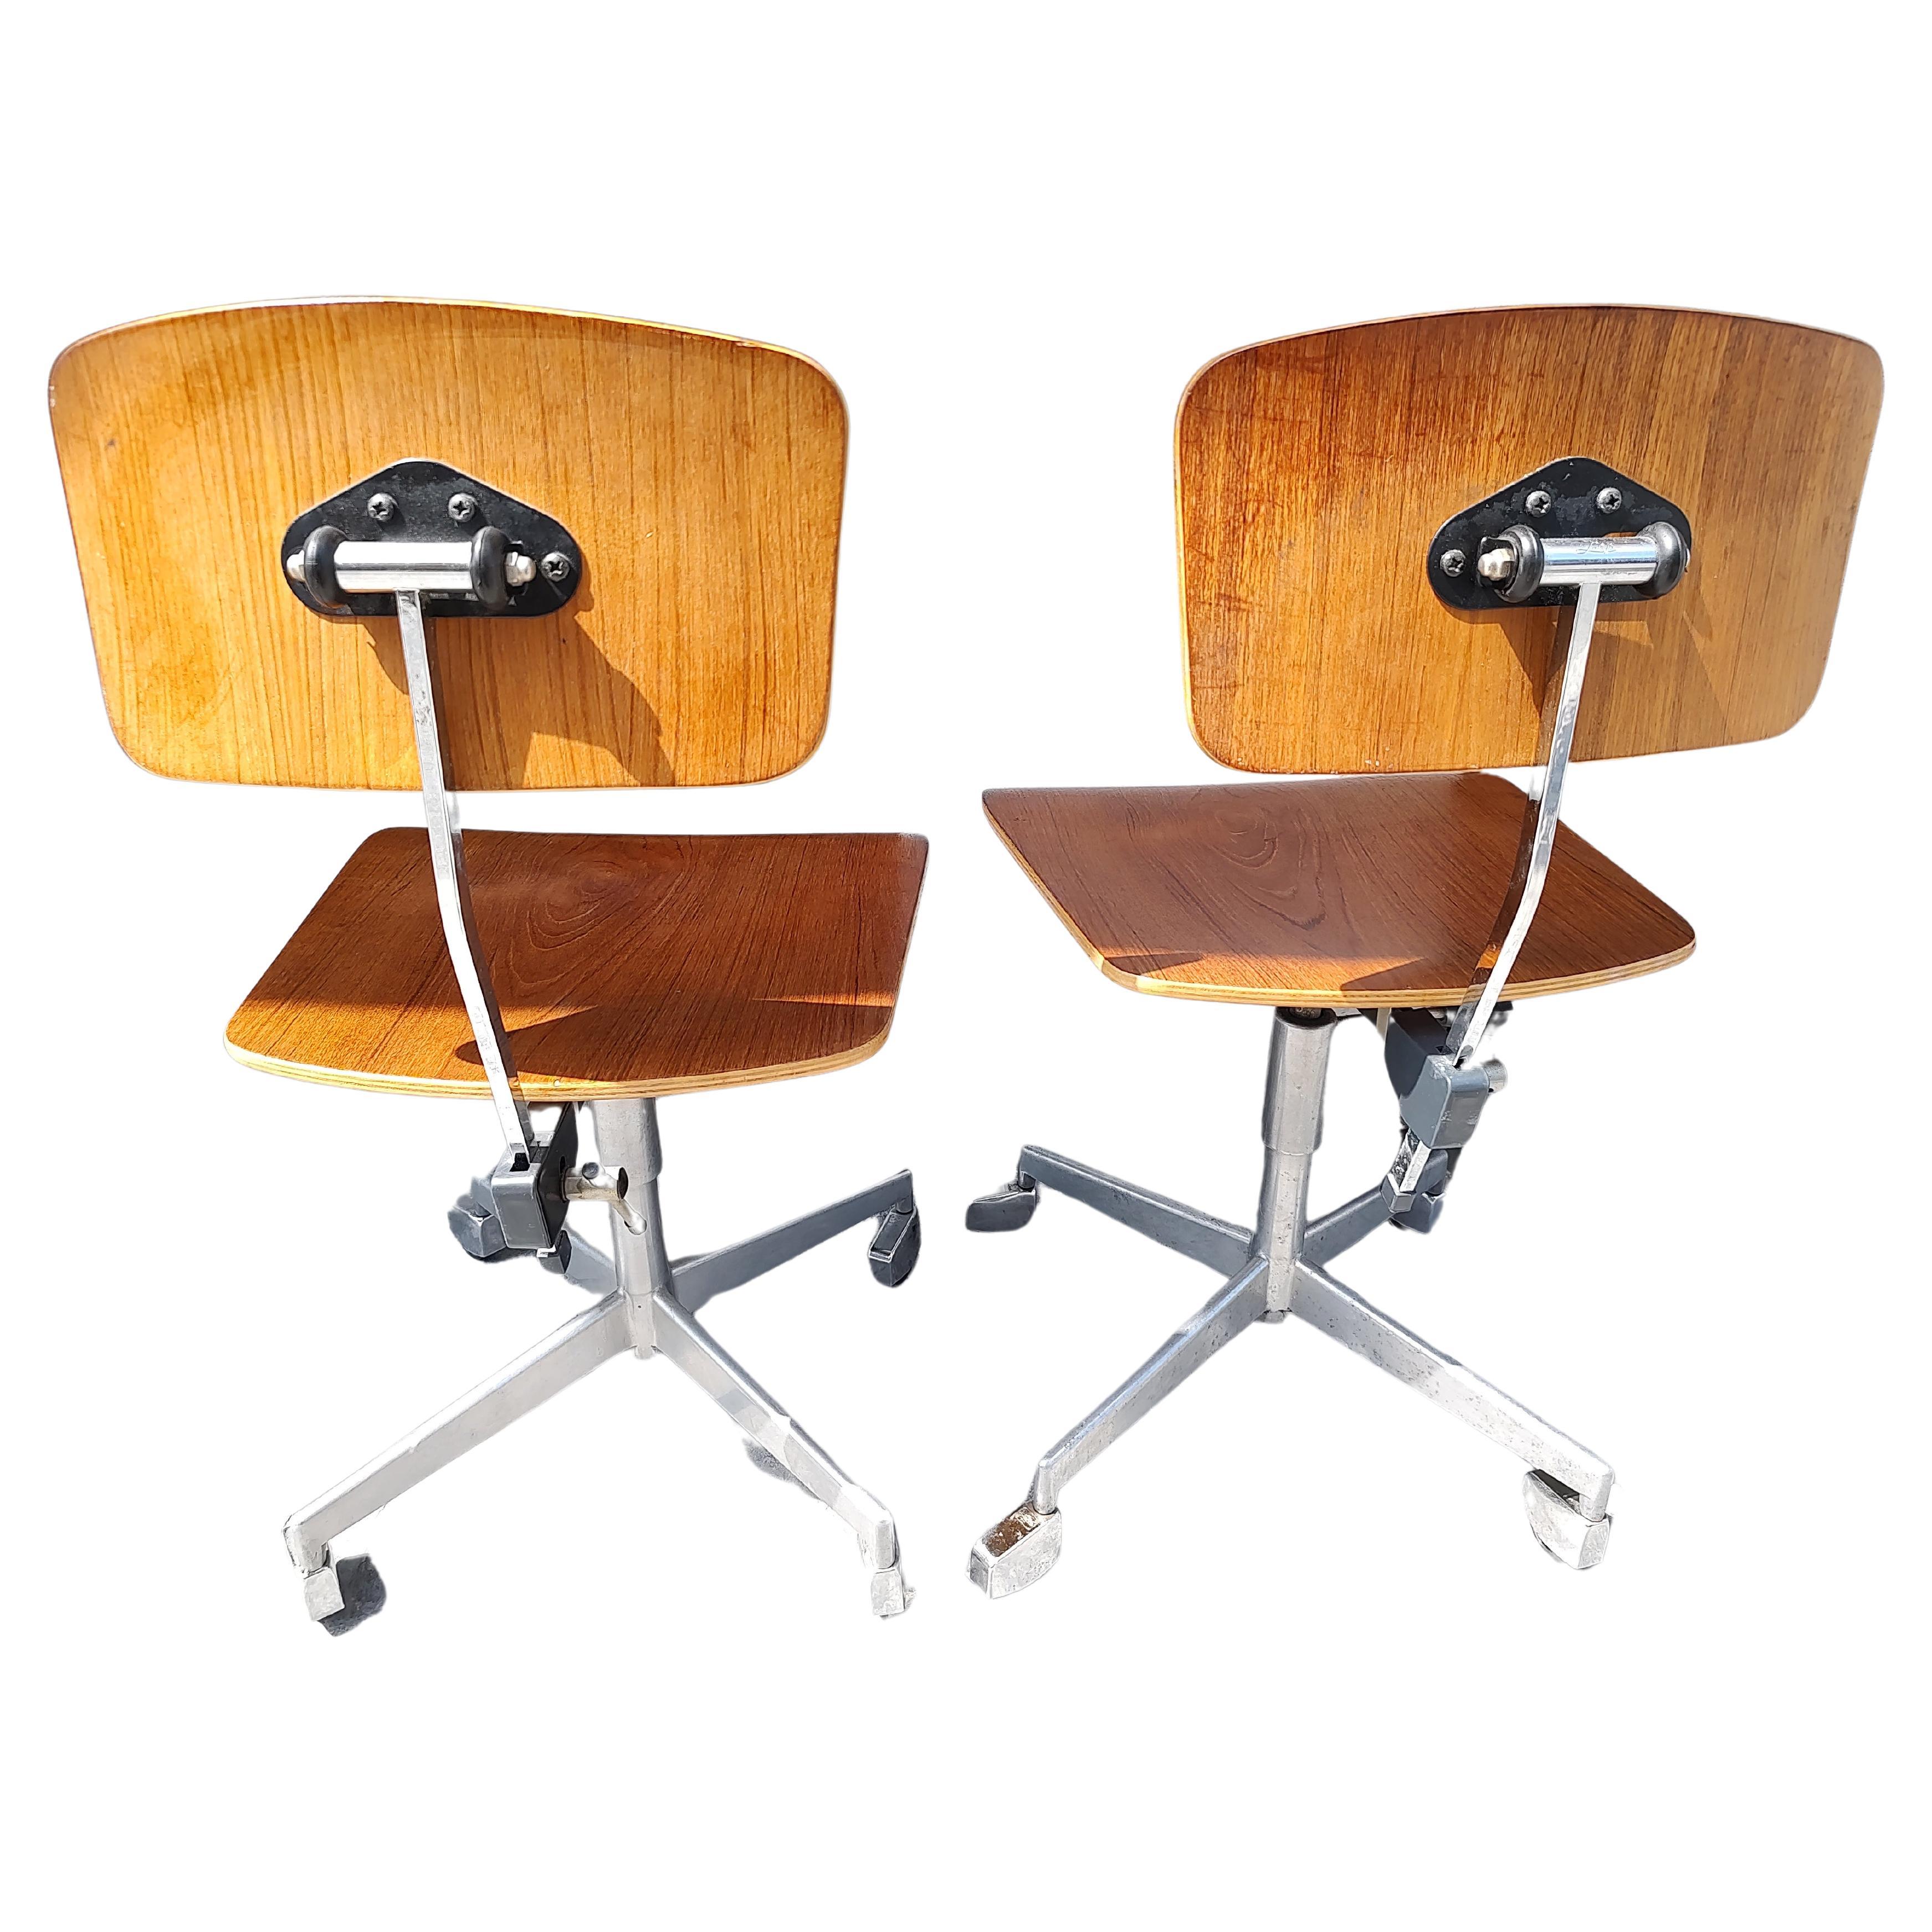 Hand-Crafted Mid-Century Modern Adjustable Desk Dining Chairs by Jorgen Rasmussen for Labofa For Sale